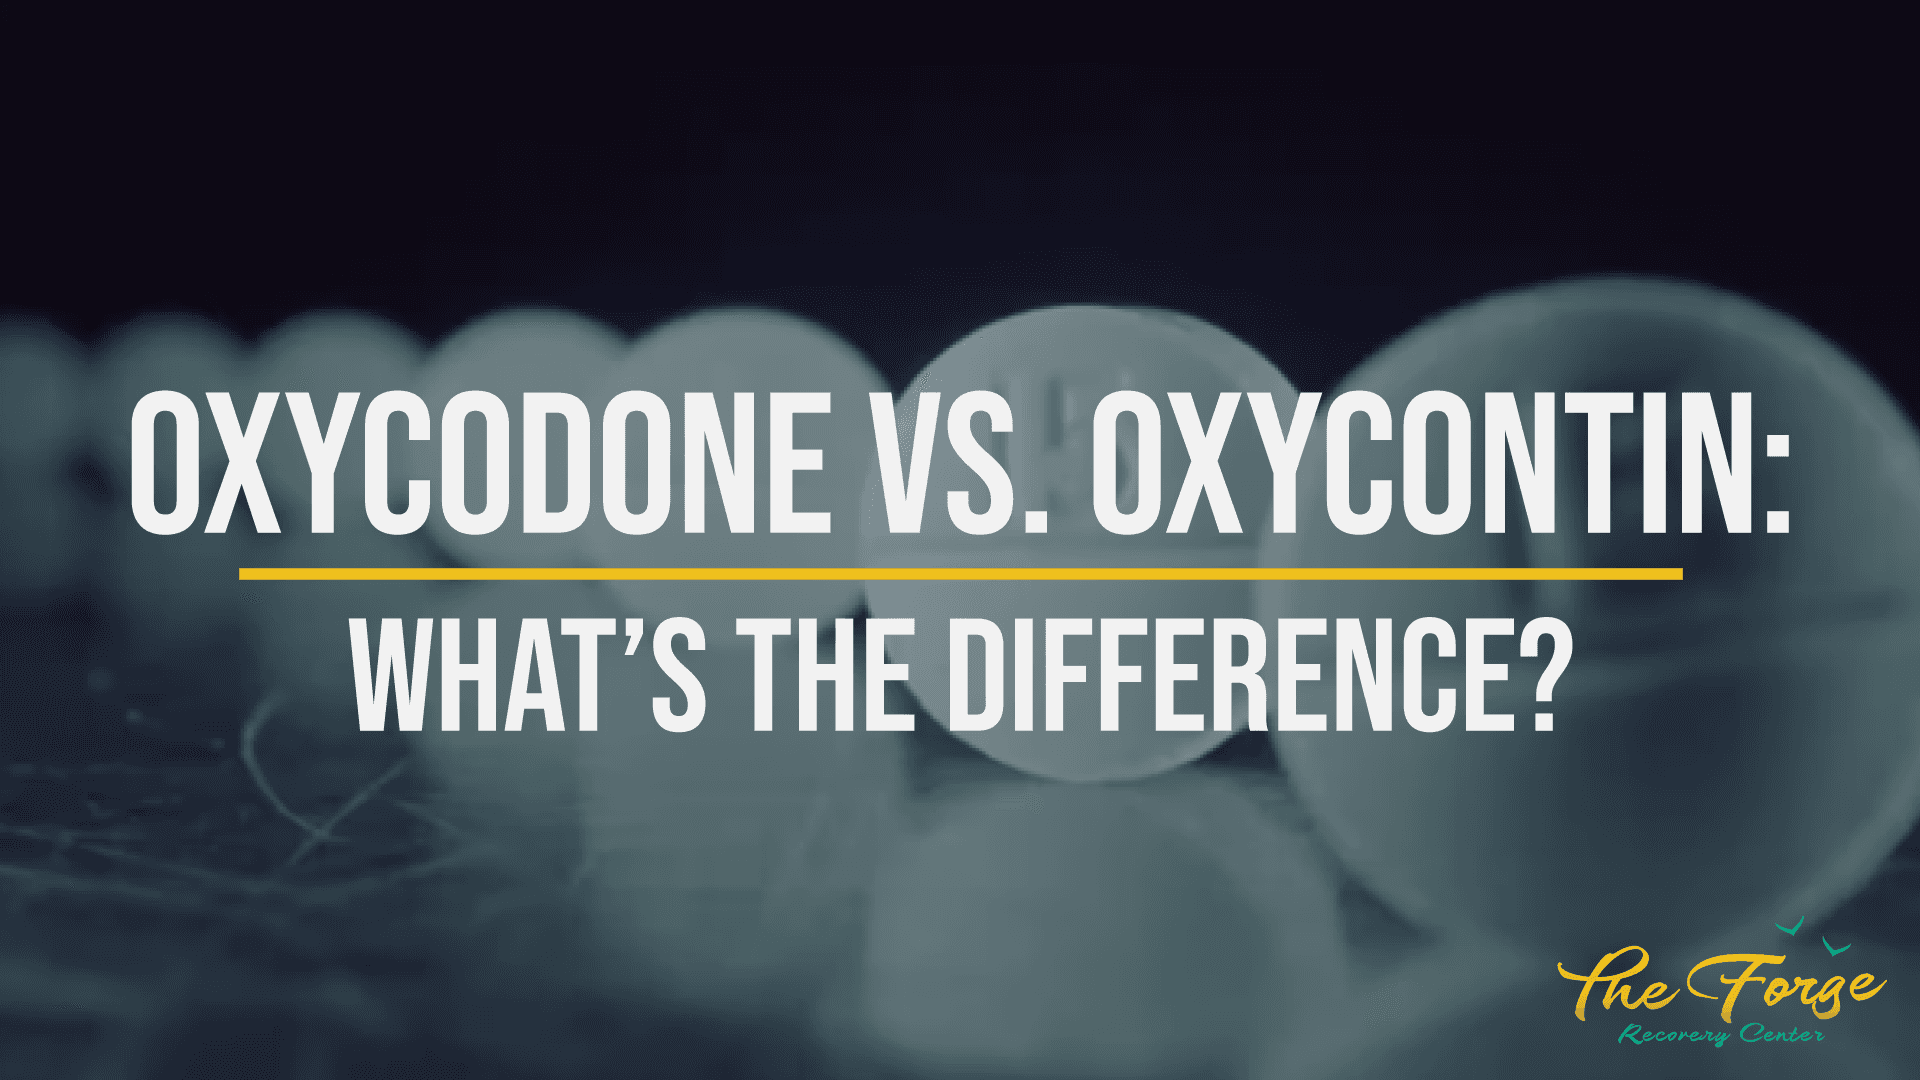 Oxycodone vs. OxyContin: What's the Difference?